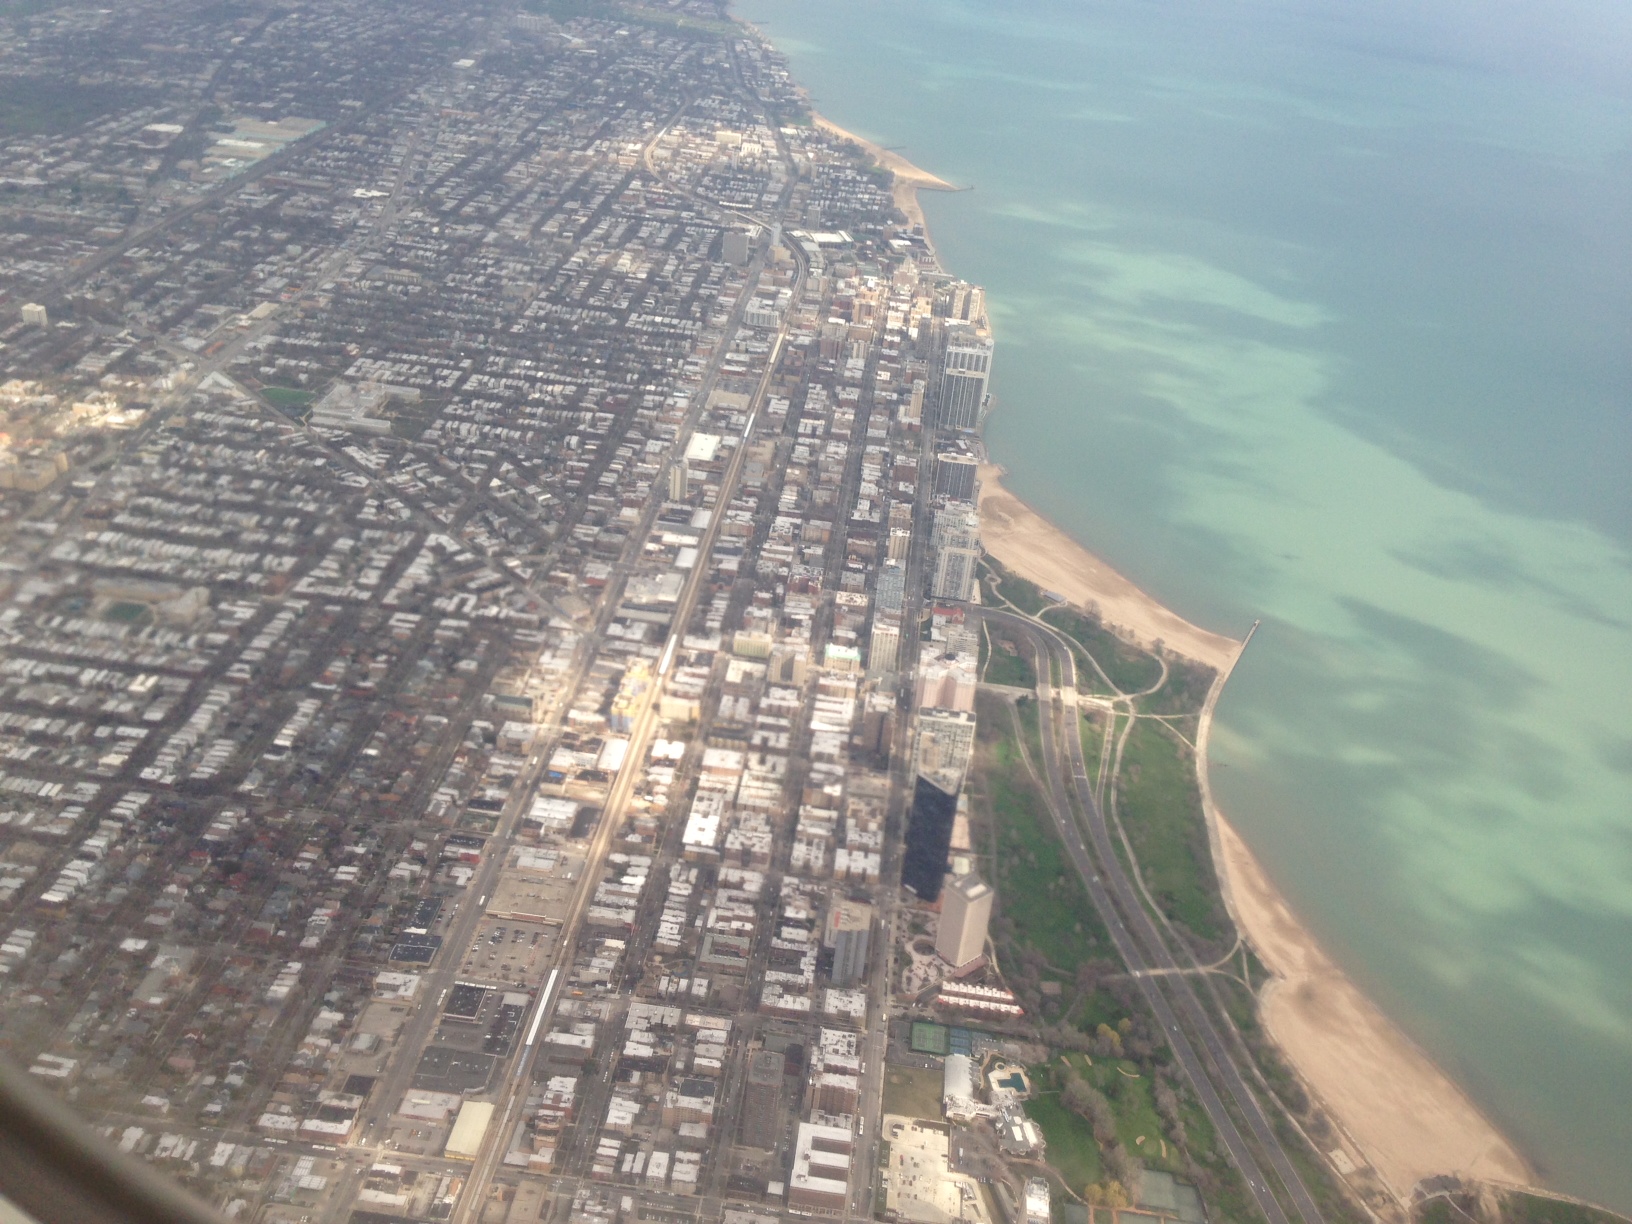 Chicago from the sky.